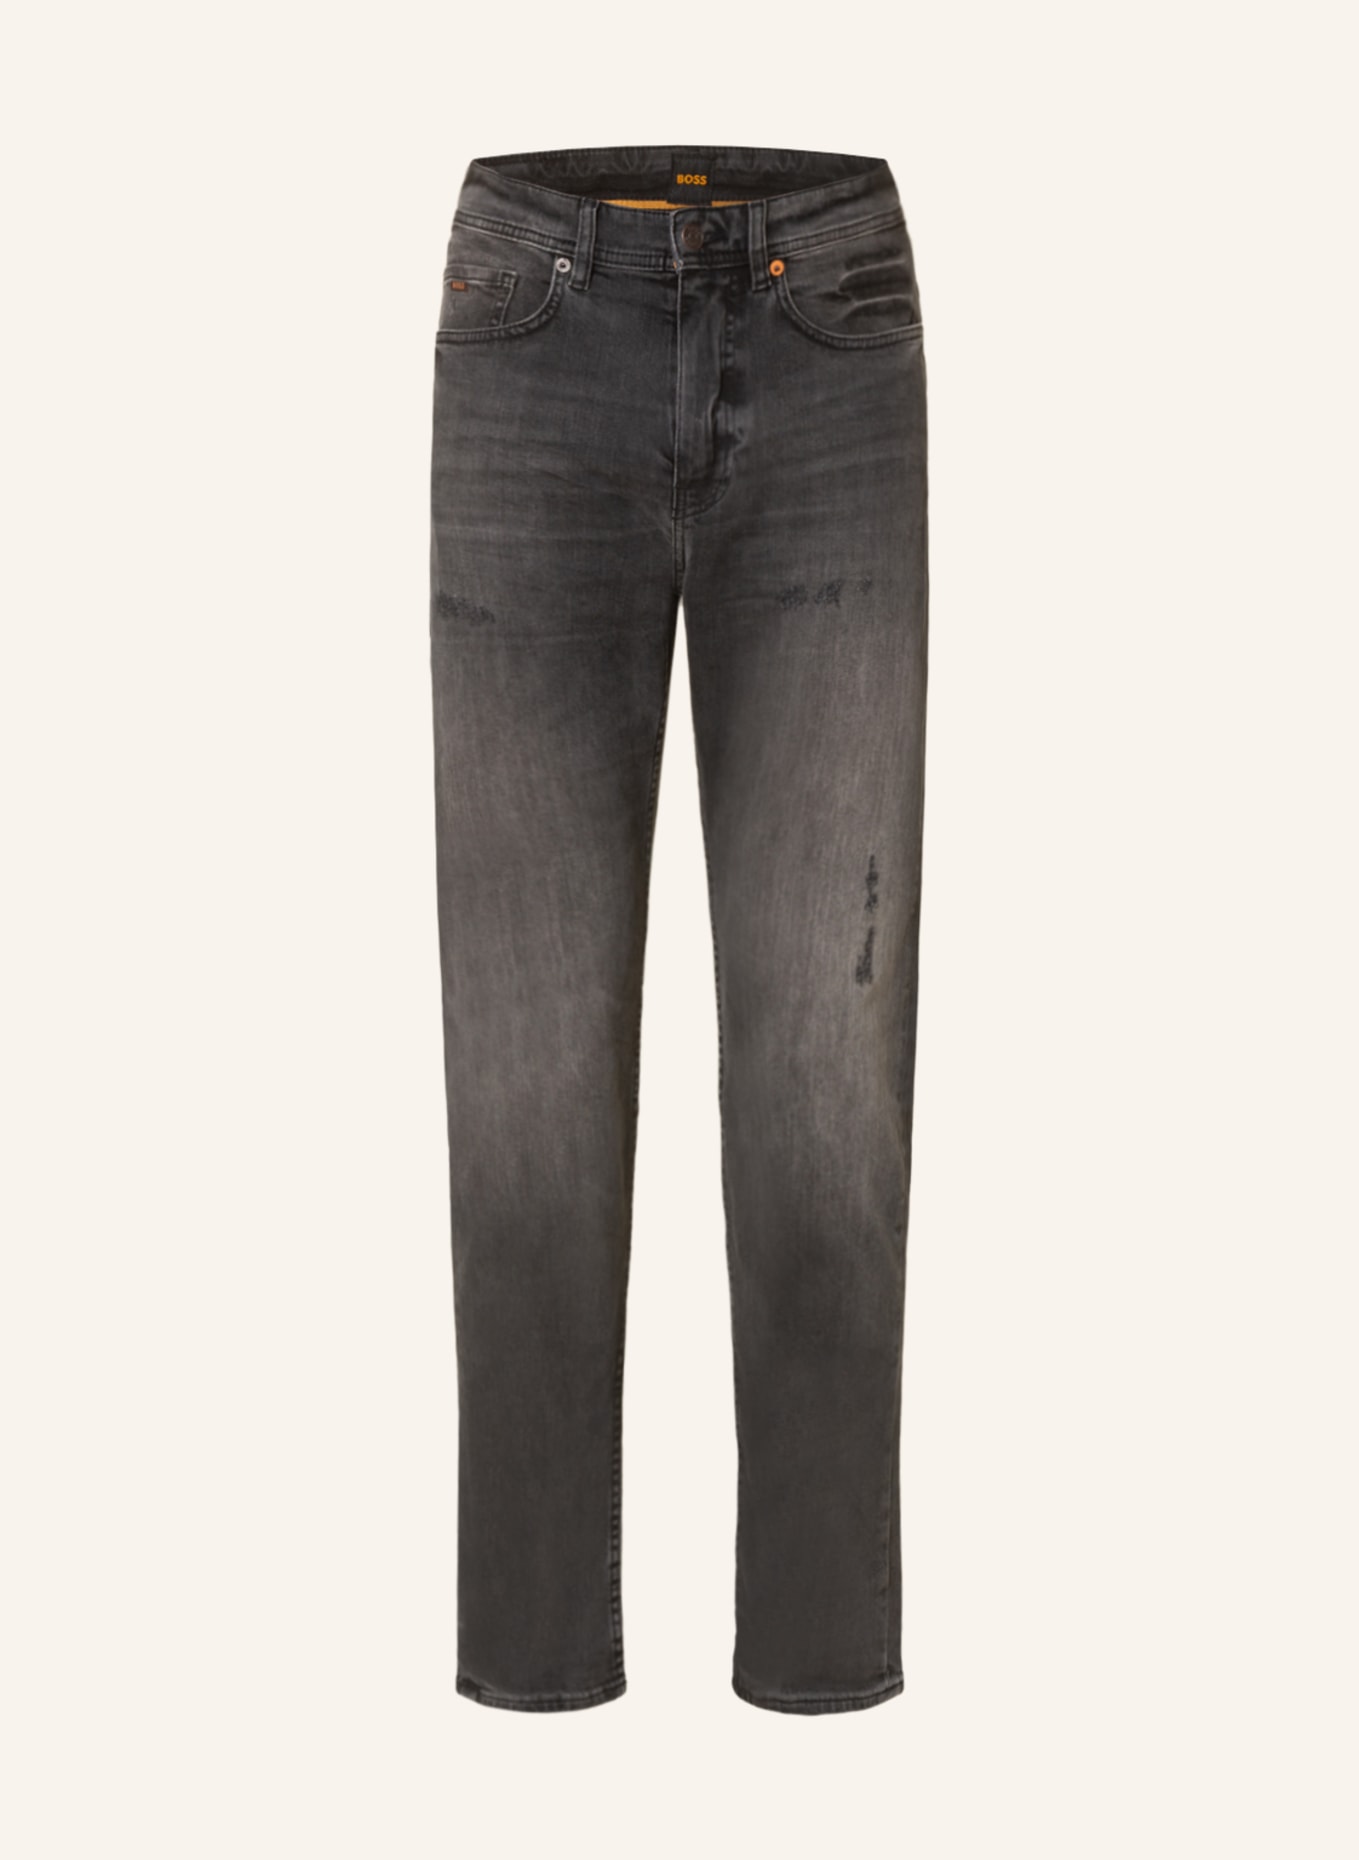 BOSS Destroyed Jeans TABER Tapered Fit, Farbe: 007 BLACK (Bild 1)